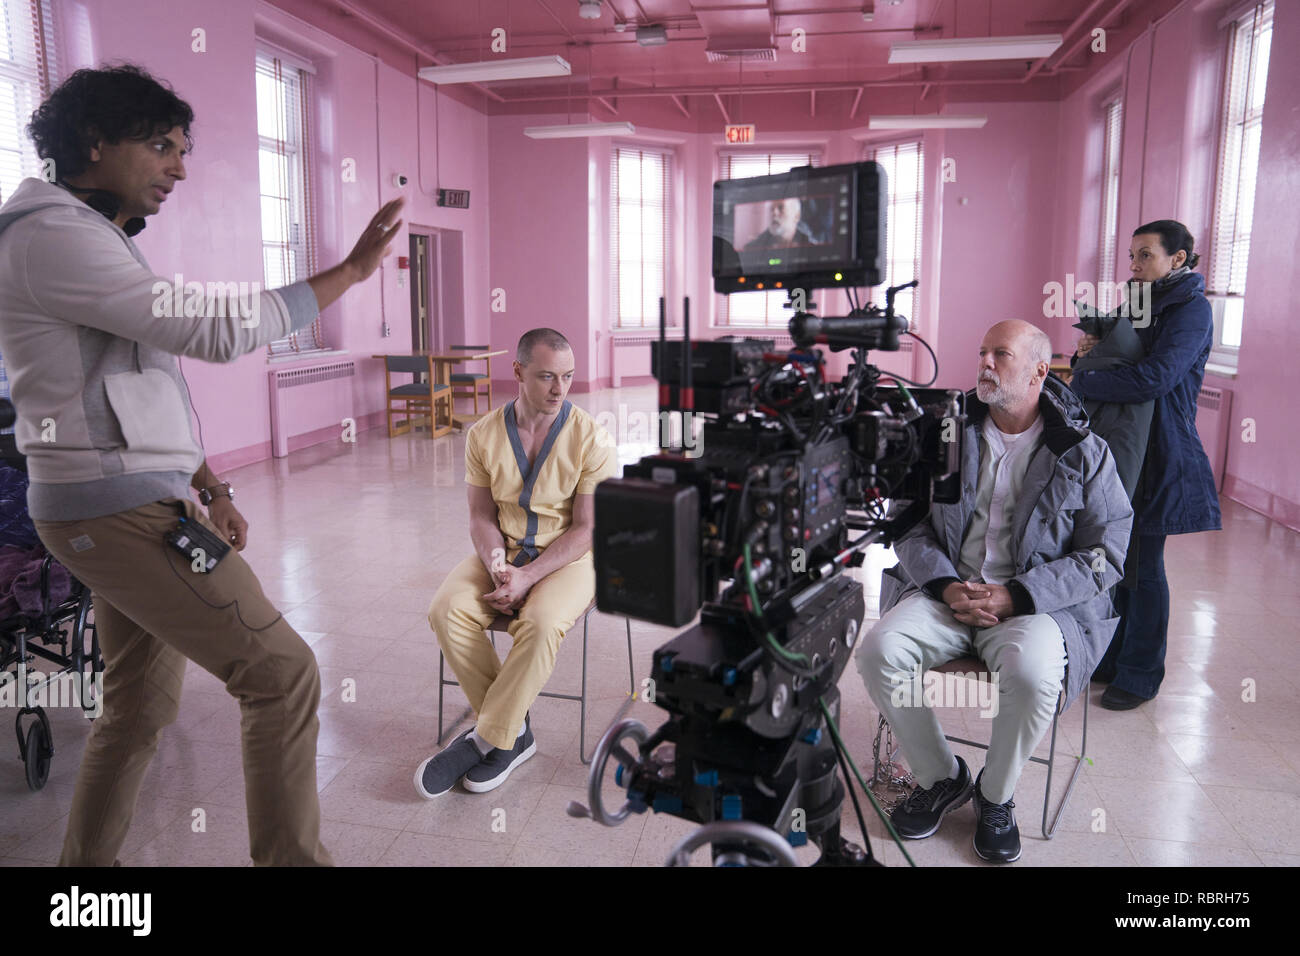 (from left) Writer-director M. Night Shyamalan, James McAvoy, who plays Kevin Wendell Crumb/The Horde, Bruce Willis, who plays David Dunn/The Overseer, and a crew member, on the set of 'Glass,' written and directed by M. Night Shyamalan. Photo Credit: Universal Pictures / The Hollywood Archive Stock Photo